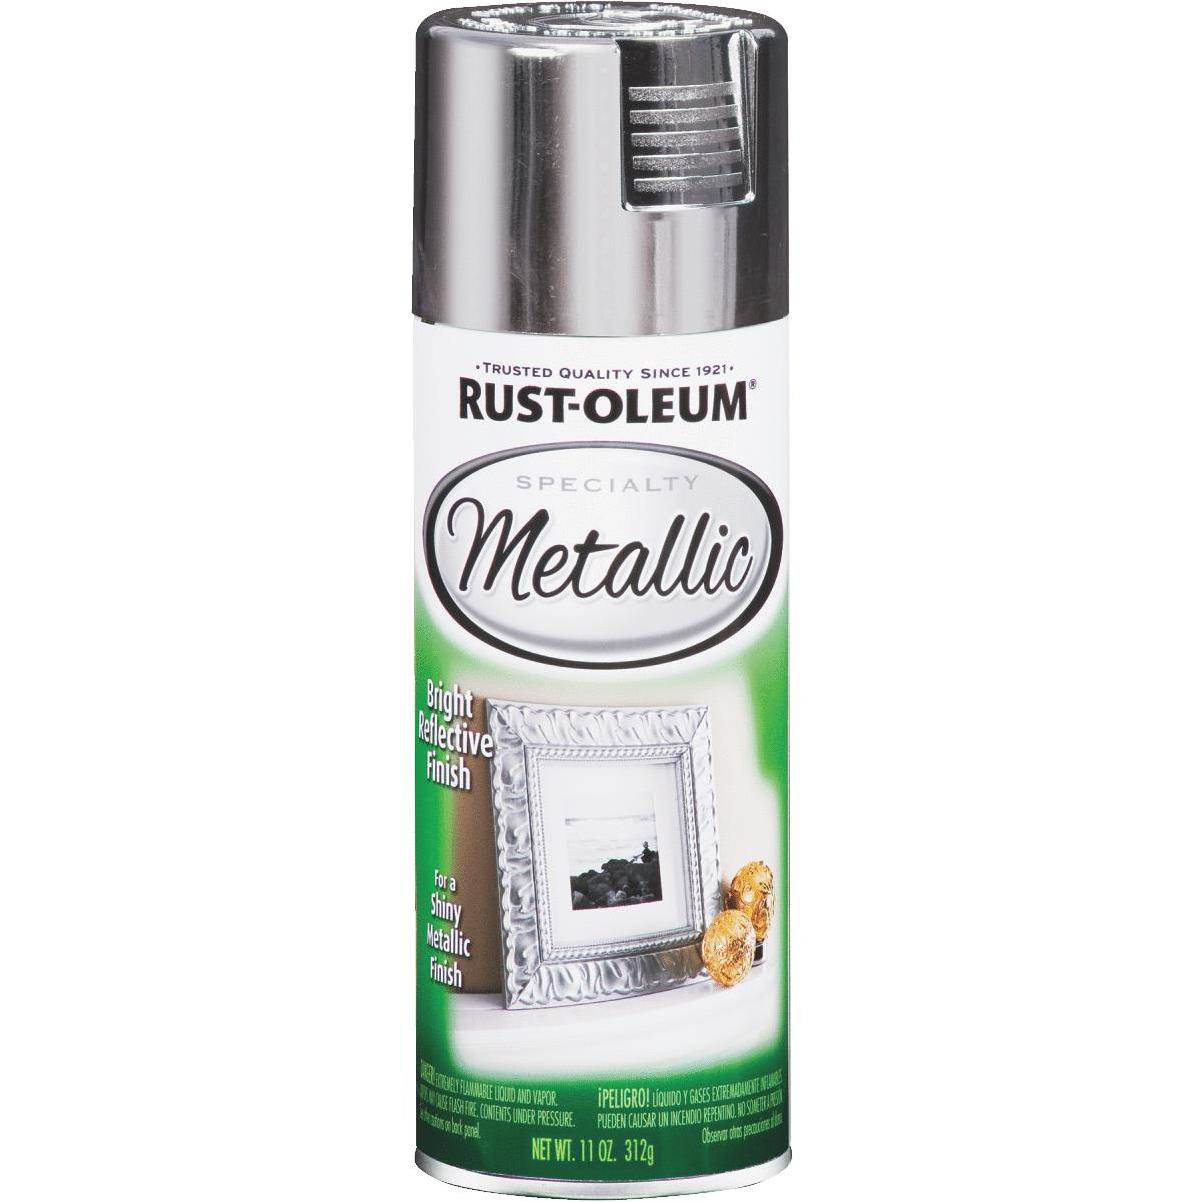 Rust-Oleum Stops Rust Gloss Silver Metallic Spray Paint (NET WT. 11-oz) in  the Spray Paint department at